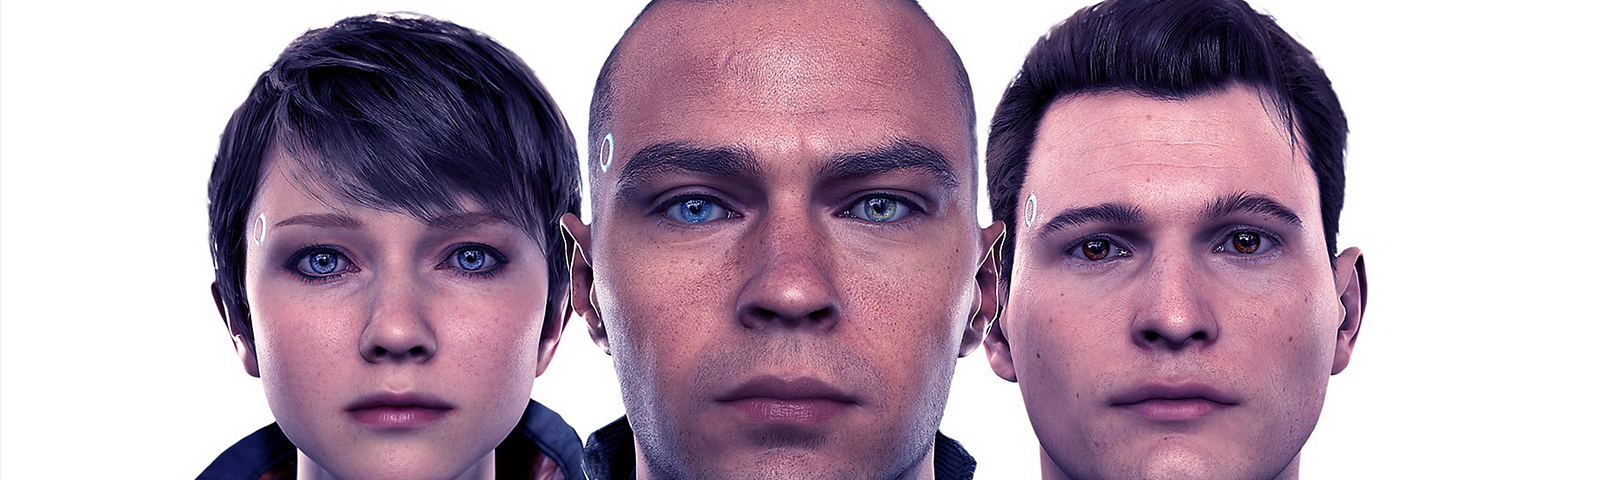 detroit-become-human-characters